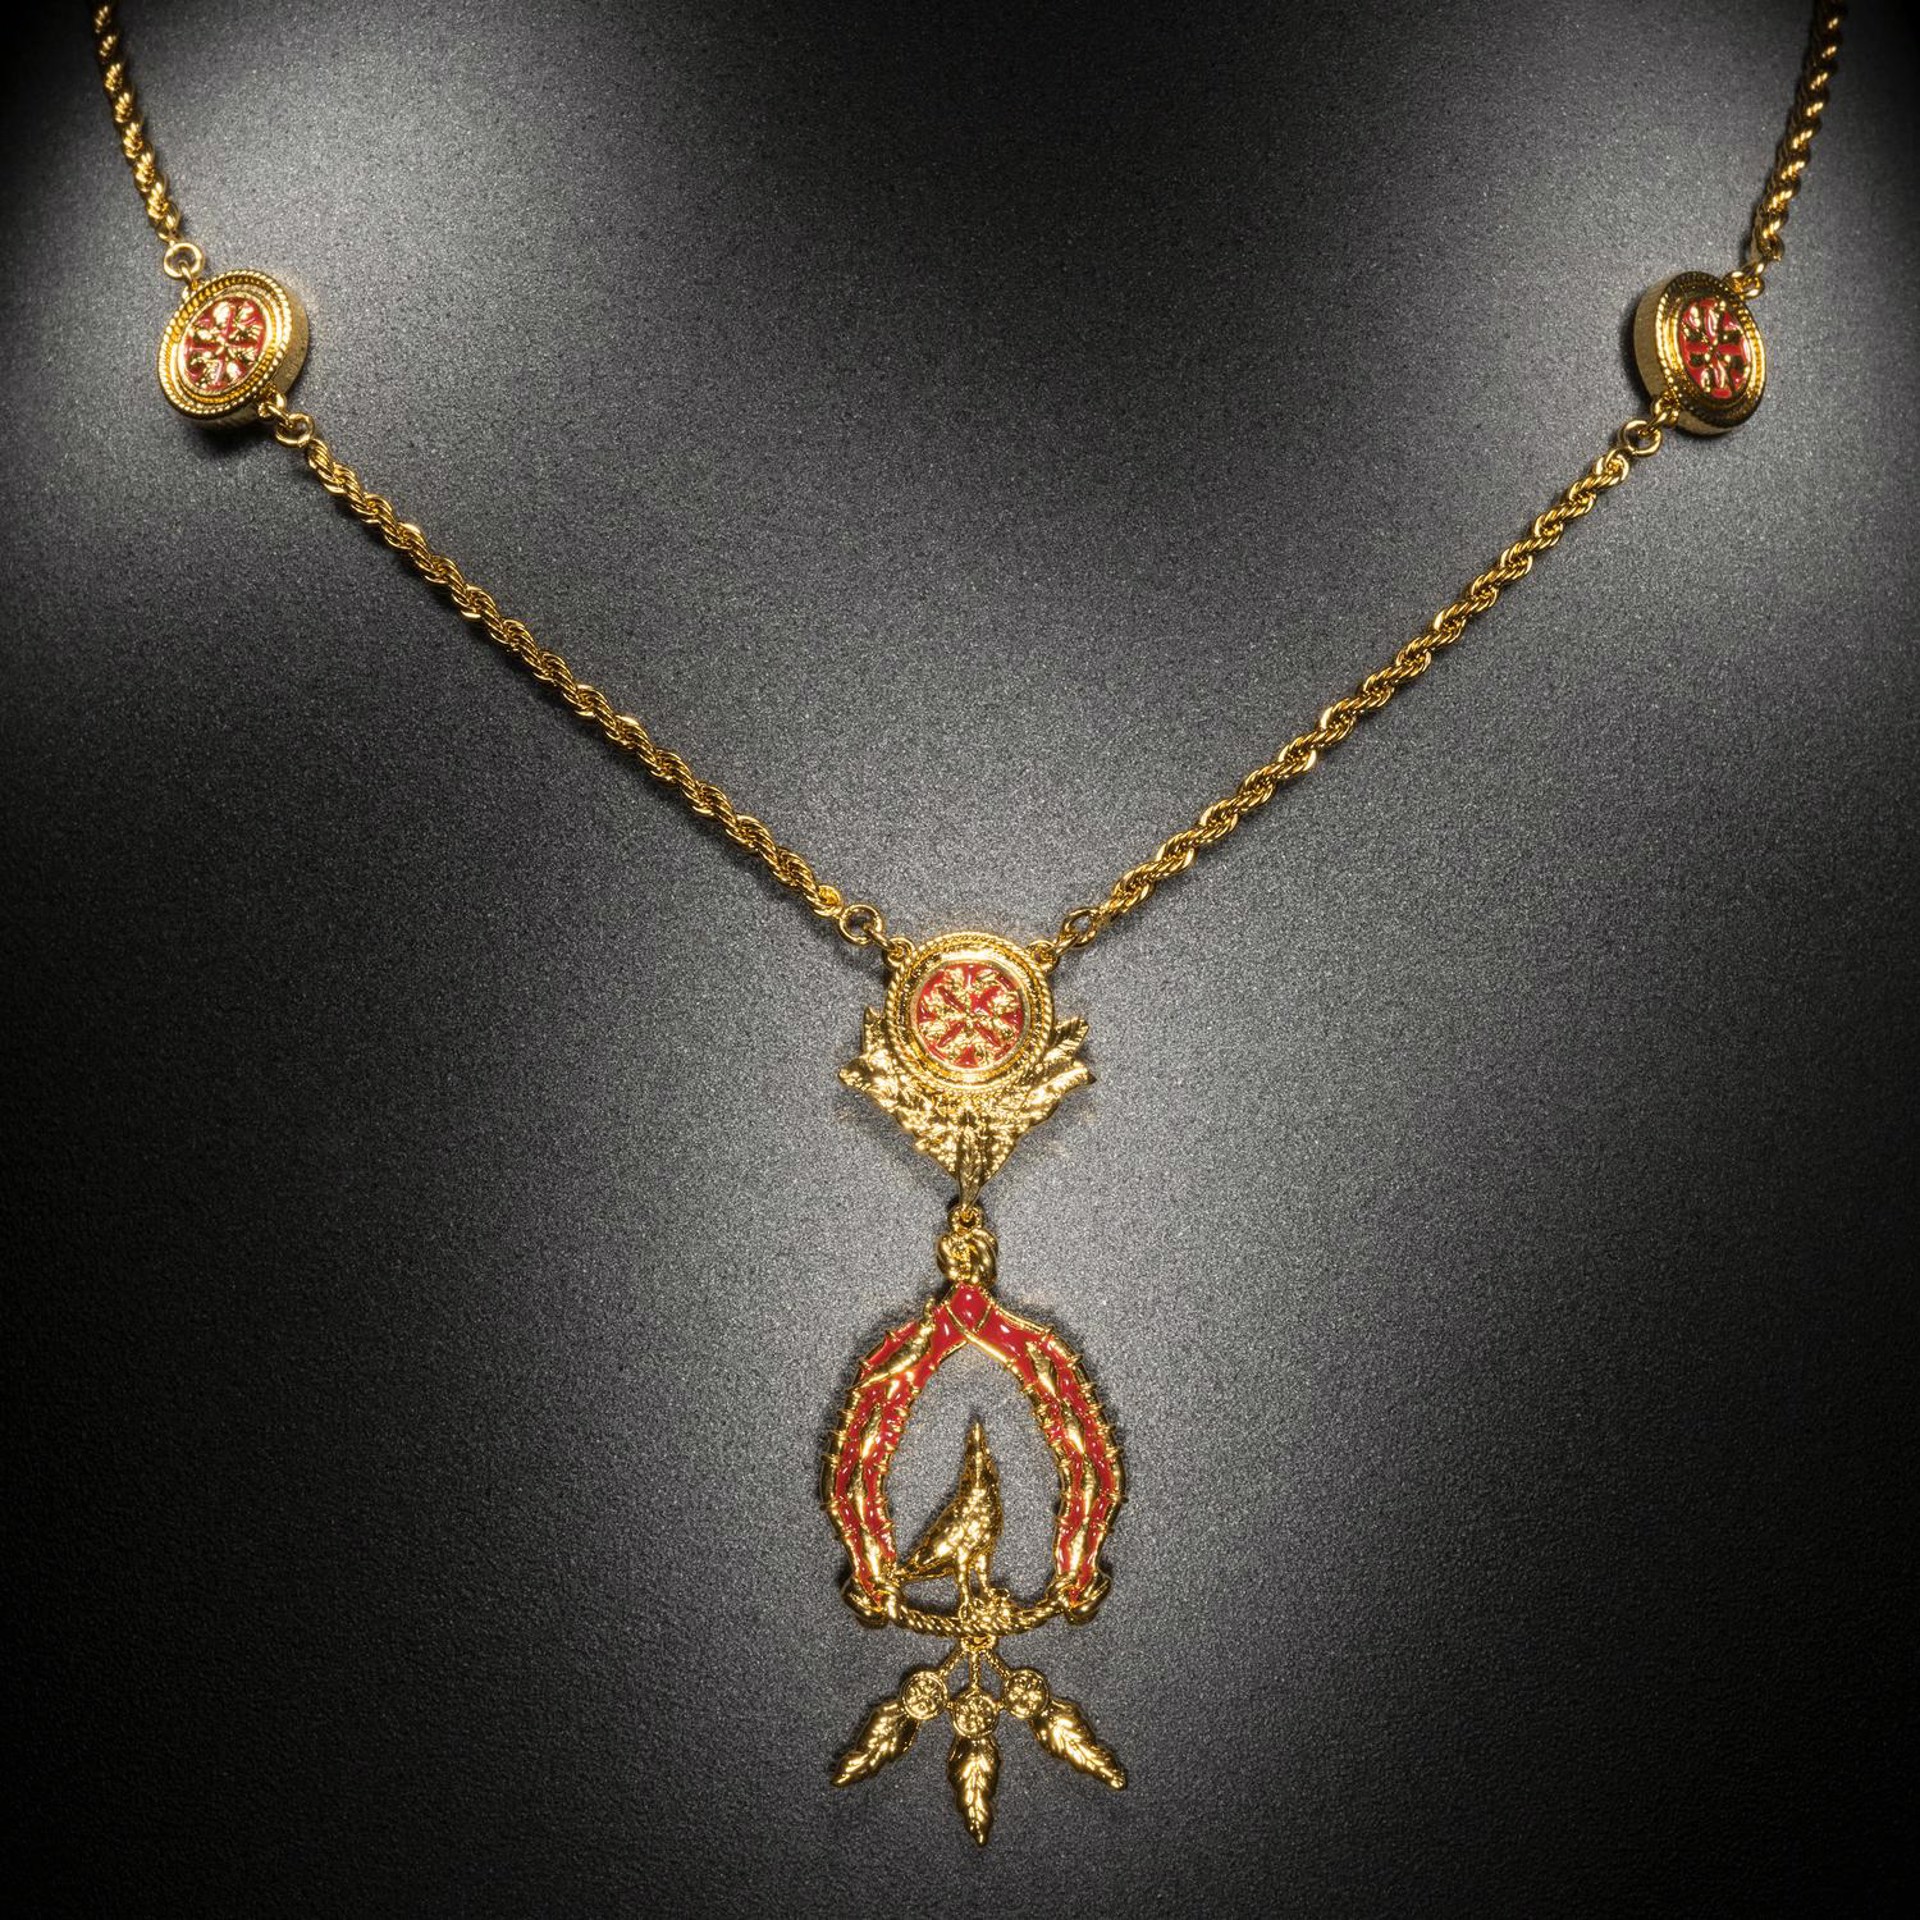 Vigor Necklace with Feathers - Gold & Red by Angela Mia